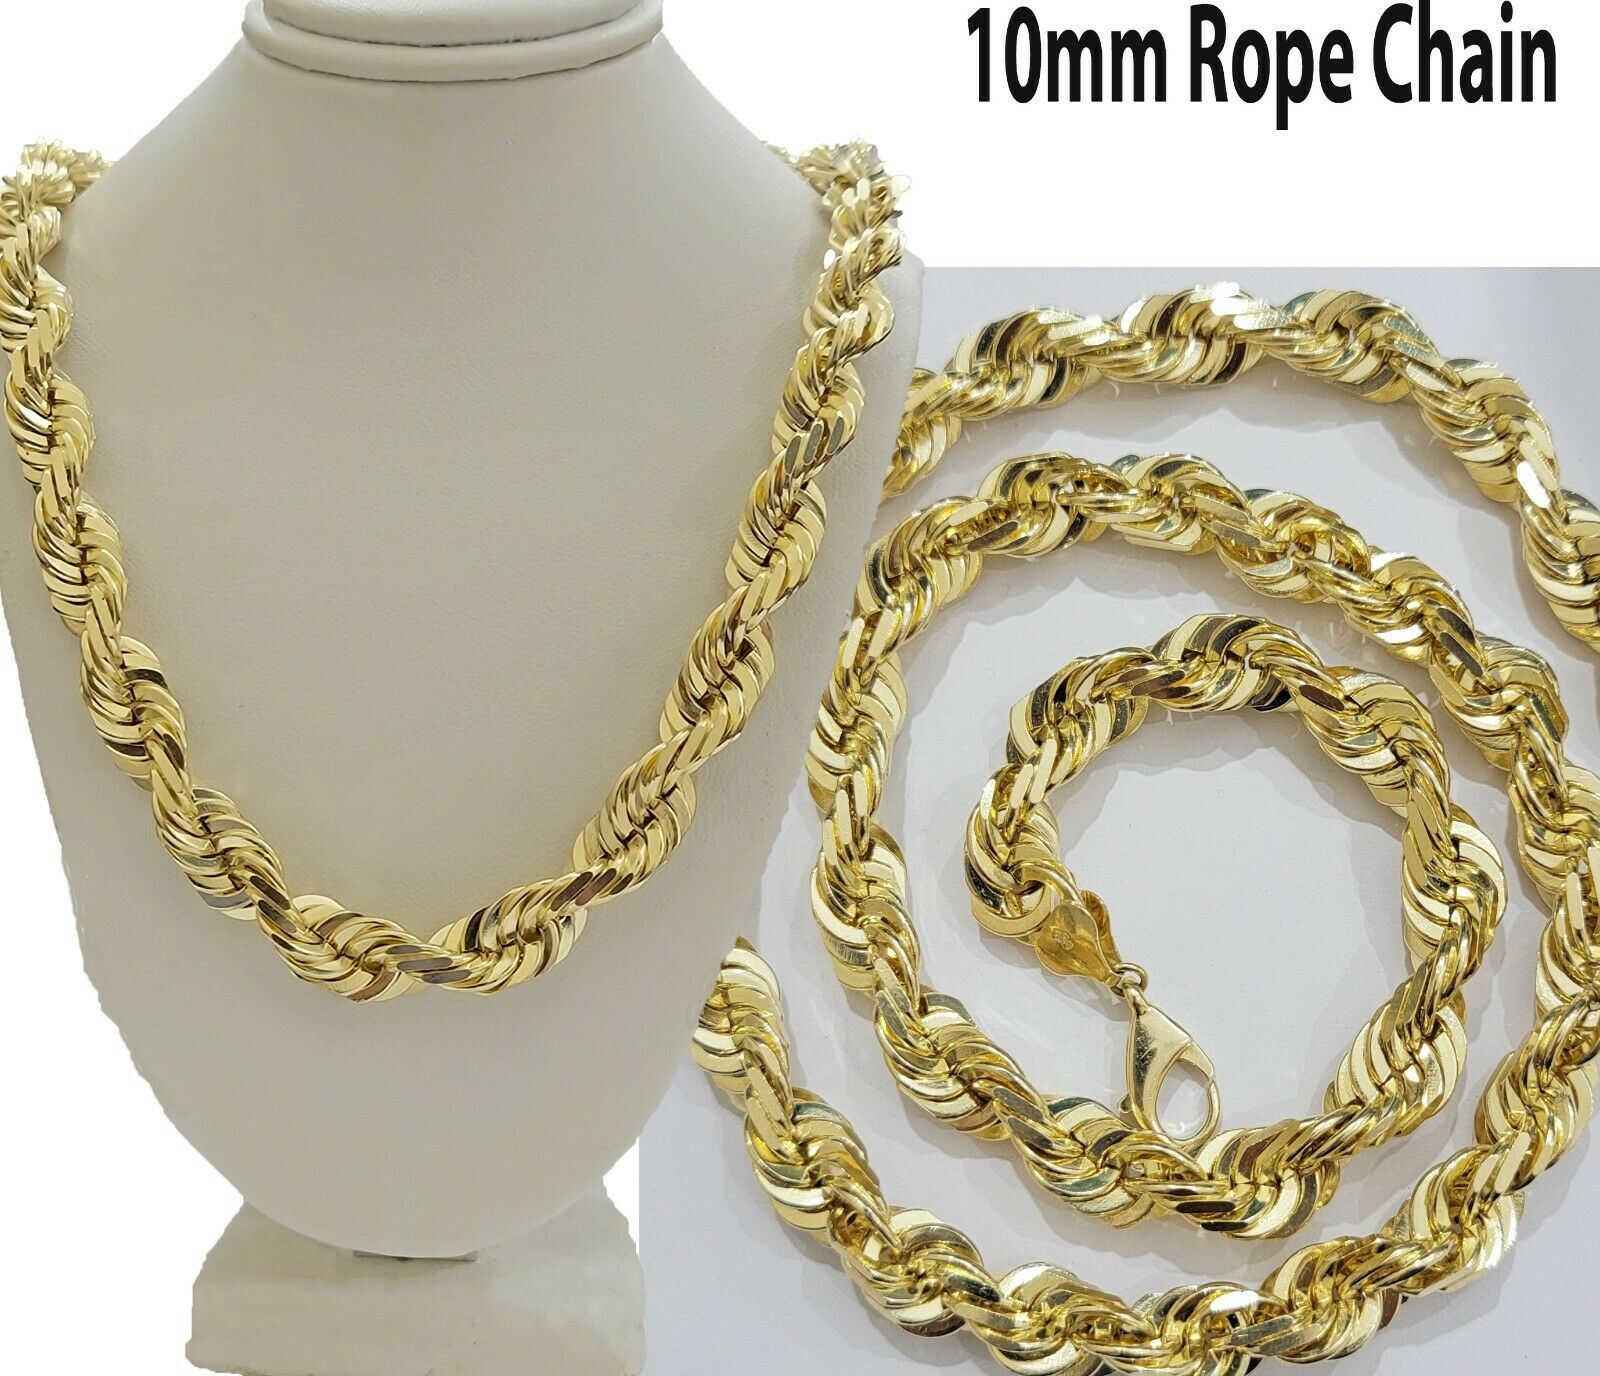 10k Solid Gold Diamond Cut Cable Chain - BULK 2.5m Spool – forEVER